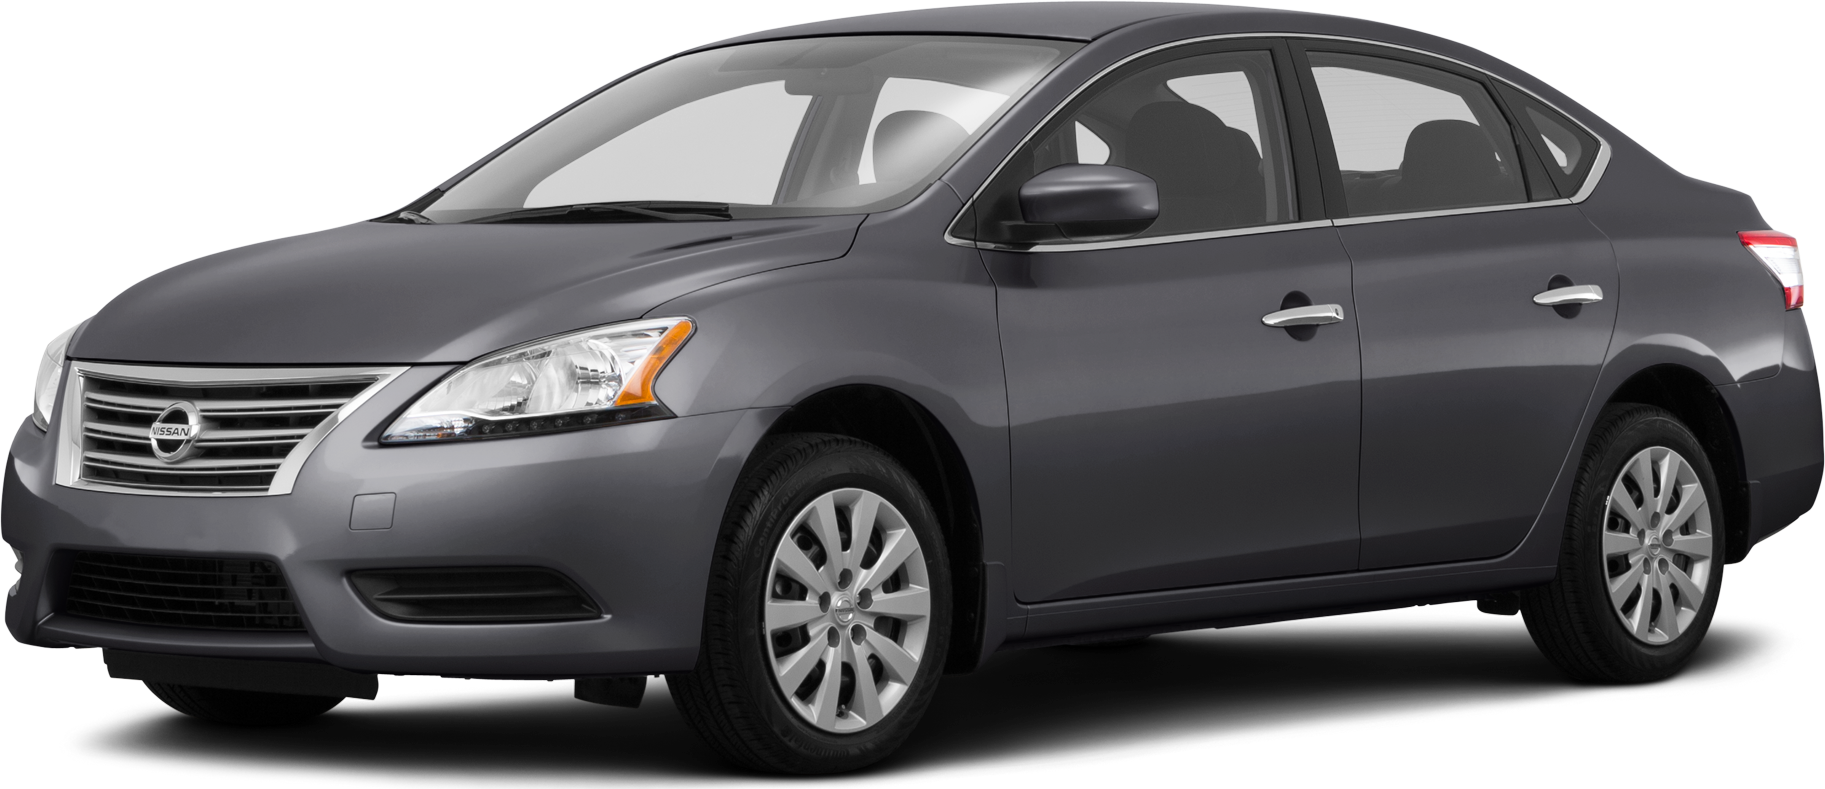 15 Nissan Sentra Values Cars For Sale Kelley Blue Book